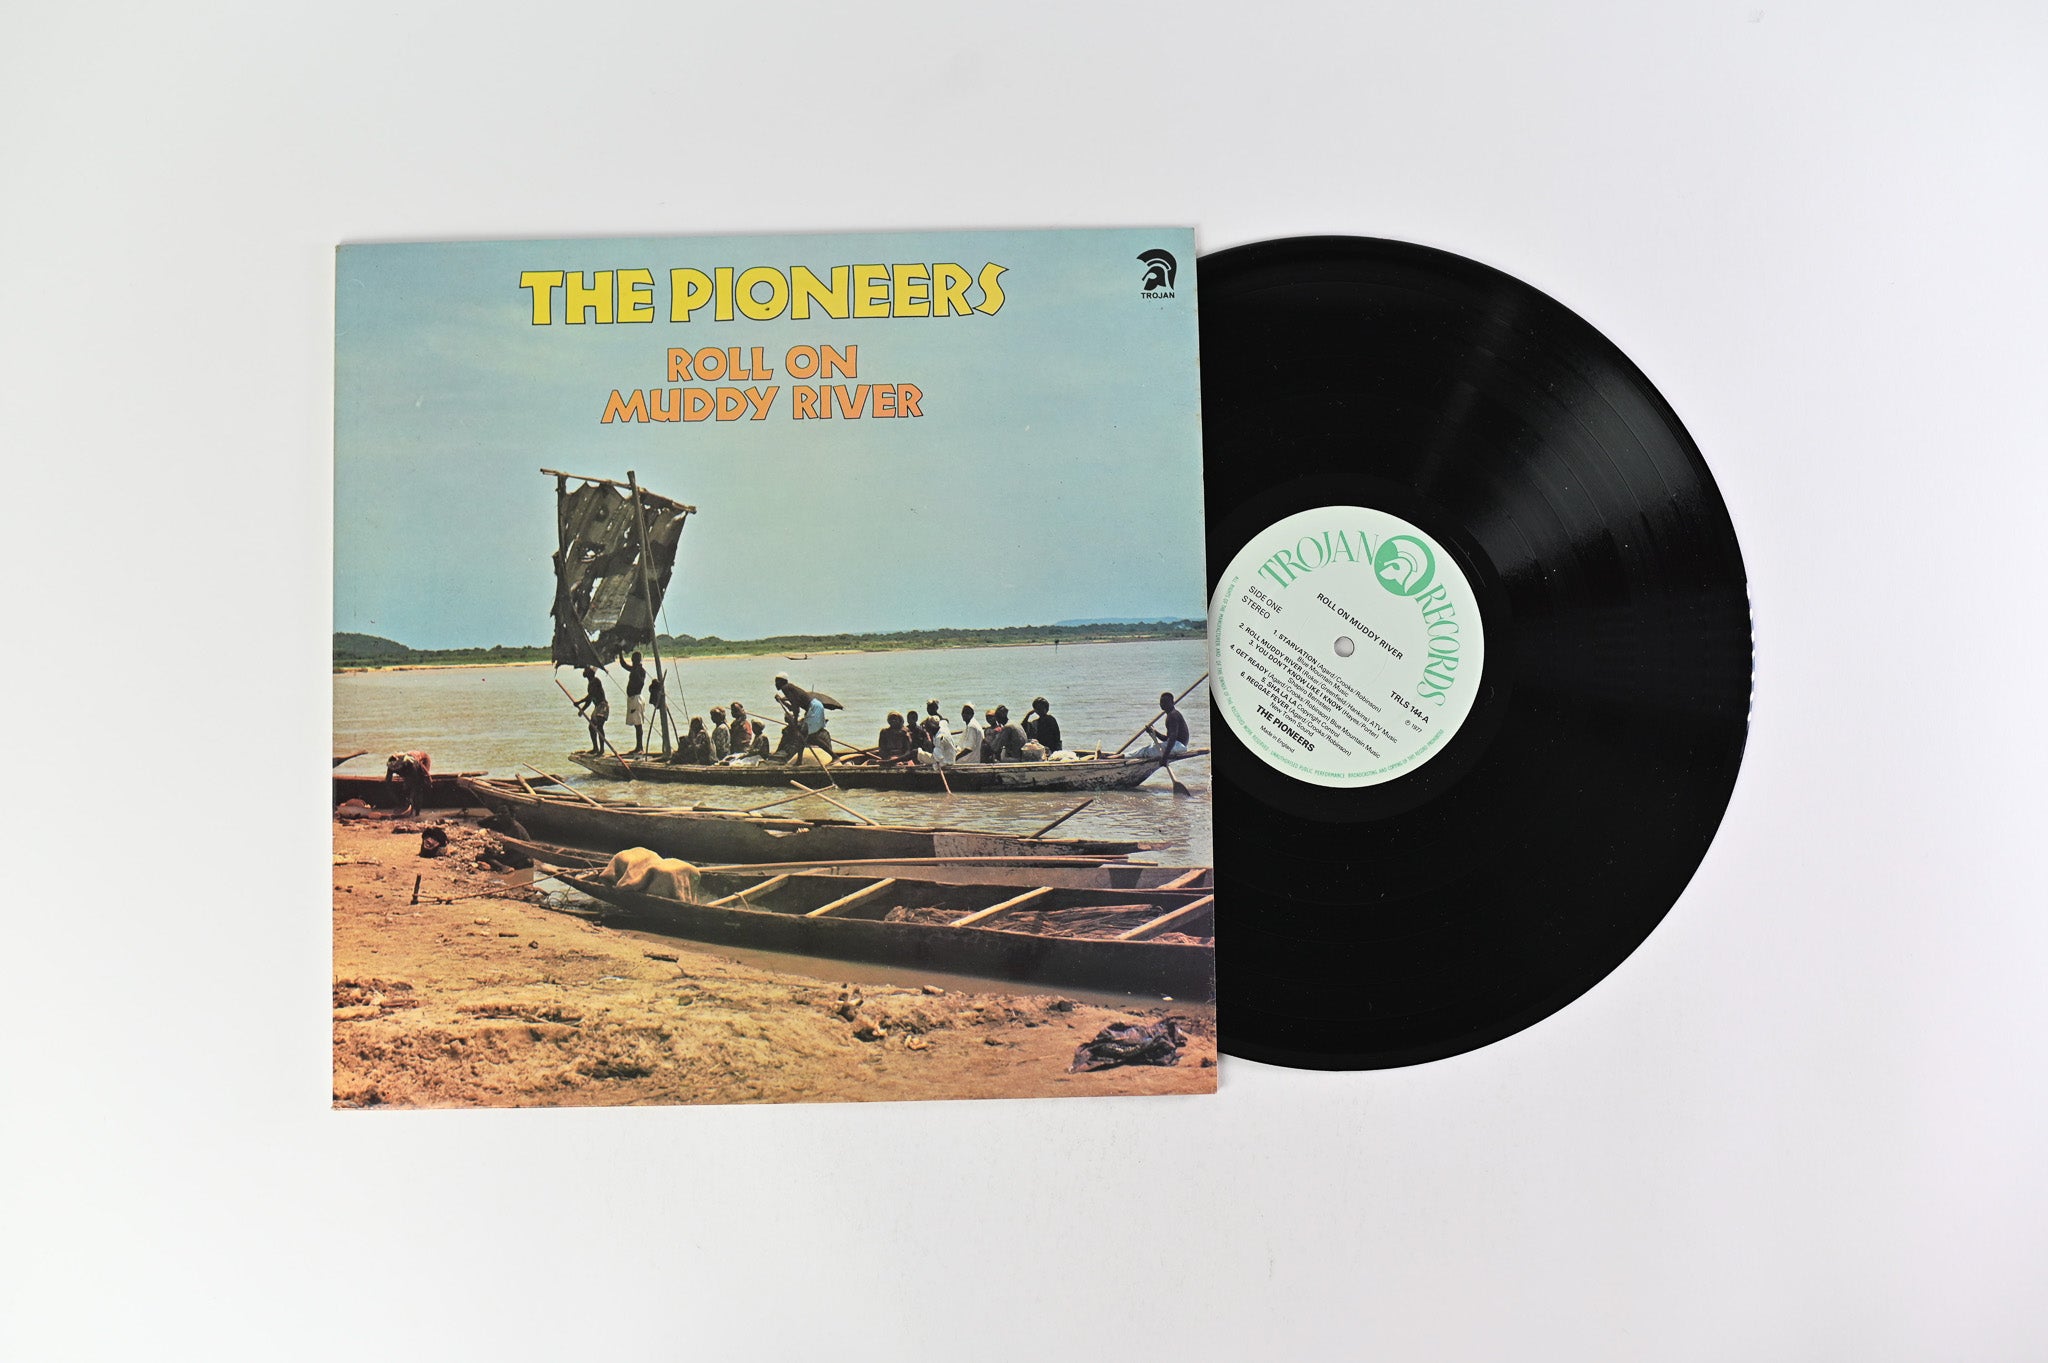 The Pioneers - Roll On Muddy River on Trojan Records